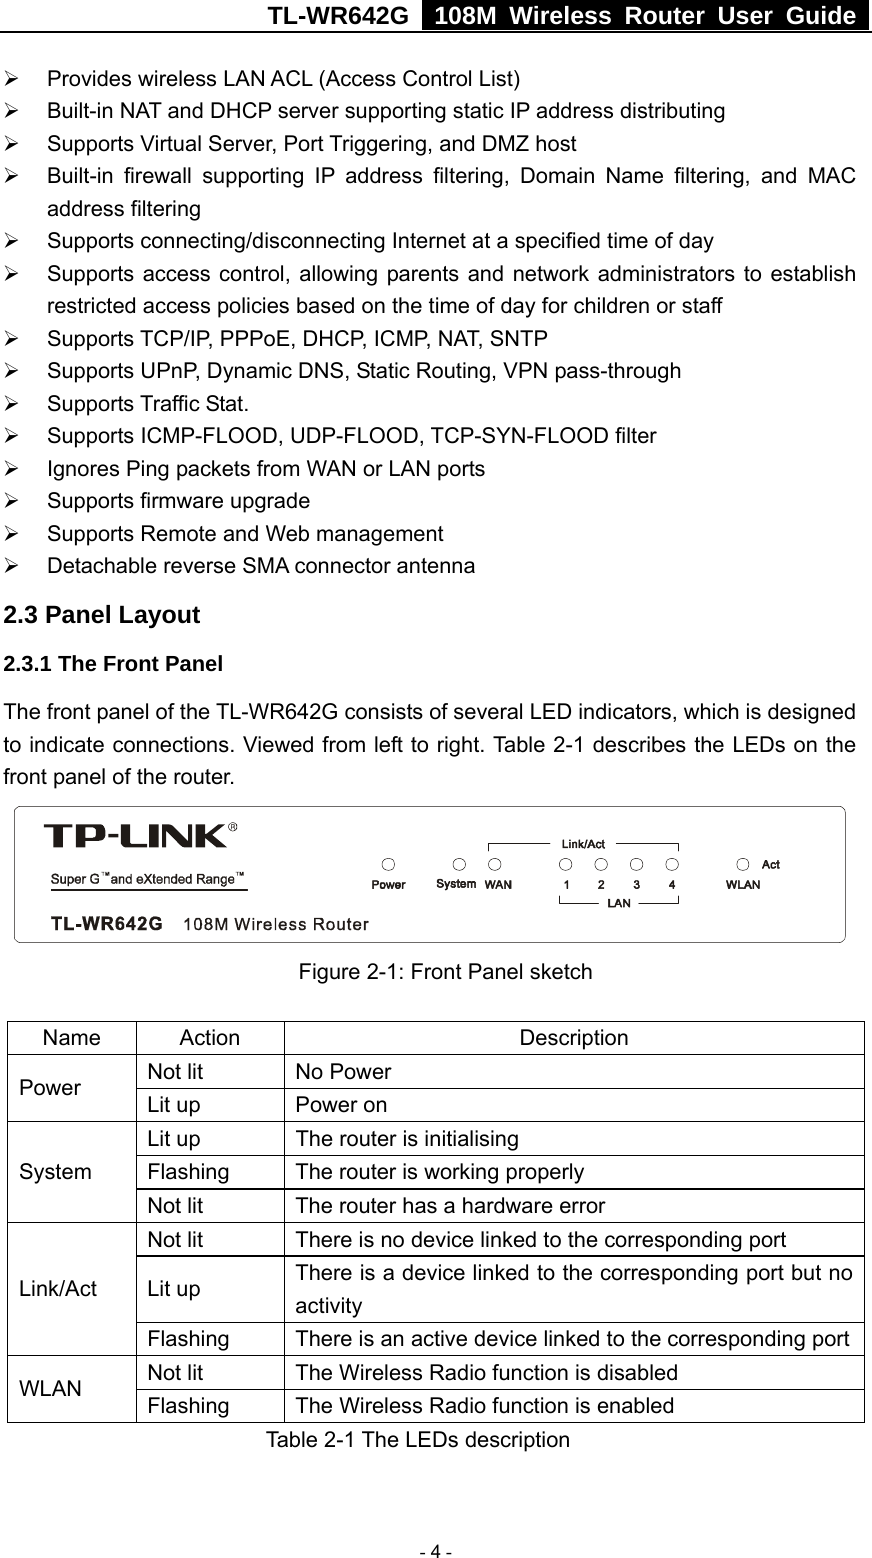 TL-WR642G   108M Wireless Router User Guide   - 4 - ¾  Provides wireless LAN ACL (Access Control List)   ¾  Built-in NAT and DHCP server supporting static IP address distributing ¾  Supports Virtual Server, Port Triggering, and DMZ host ¾  Built-in firewall supporting IP address filtering, Domain Name filtering, and MAC address filtering ¾  Supports connecting/disconnecting Internet at a specified time of day ¾  Supports access control, allowing parents and network administrators to establish restricted access policies based on the time of day for children or staff ¾  Supports TCP/IP, PPPoE, DHCP, ICMP, NAT, SNTP ¾  Supports UPnP, Dynamic DNS, Static Routing, VPN pass-through ¾ Supports Traffic Stat. ¾  Supports ICMP-FLOOD, UDP-FLOOD, TCP-SYN-FLOOD filter ¾  Ignores Ping packets from WAN or LAN ports ¾  Supports firmware upgrade ¾  Supports Remote and Web management ¾ Detachable reverse SMA connector antenna 2.3 Panel Layout 2.3.1 The Front Panel The front panel of the TL-WR642G consists of several LED indicators, which is designed to indicate connections. Viewed from left to right. Table 2-1 describes the LEDs on the front panel of the router.                Figure 2-1: Front Panel sketch  Name Action  Description Not lit  No Power Power  Lit up  Power on Lit up  The router is initialising Flashing  The router is working properly System Not lit  The router has a hardware error Not lit  There is no device linked to the corresponding port Lit up  There is a device linked to the corresponding port but no activity Link/Act Flashing  There is an active device linked to the corresponding portNot lit  The Wireless Radio function is disabled WLAN  Flashing  The Wireless Radio function is enabled             Table 2-1 The LEDs description 